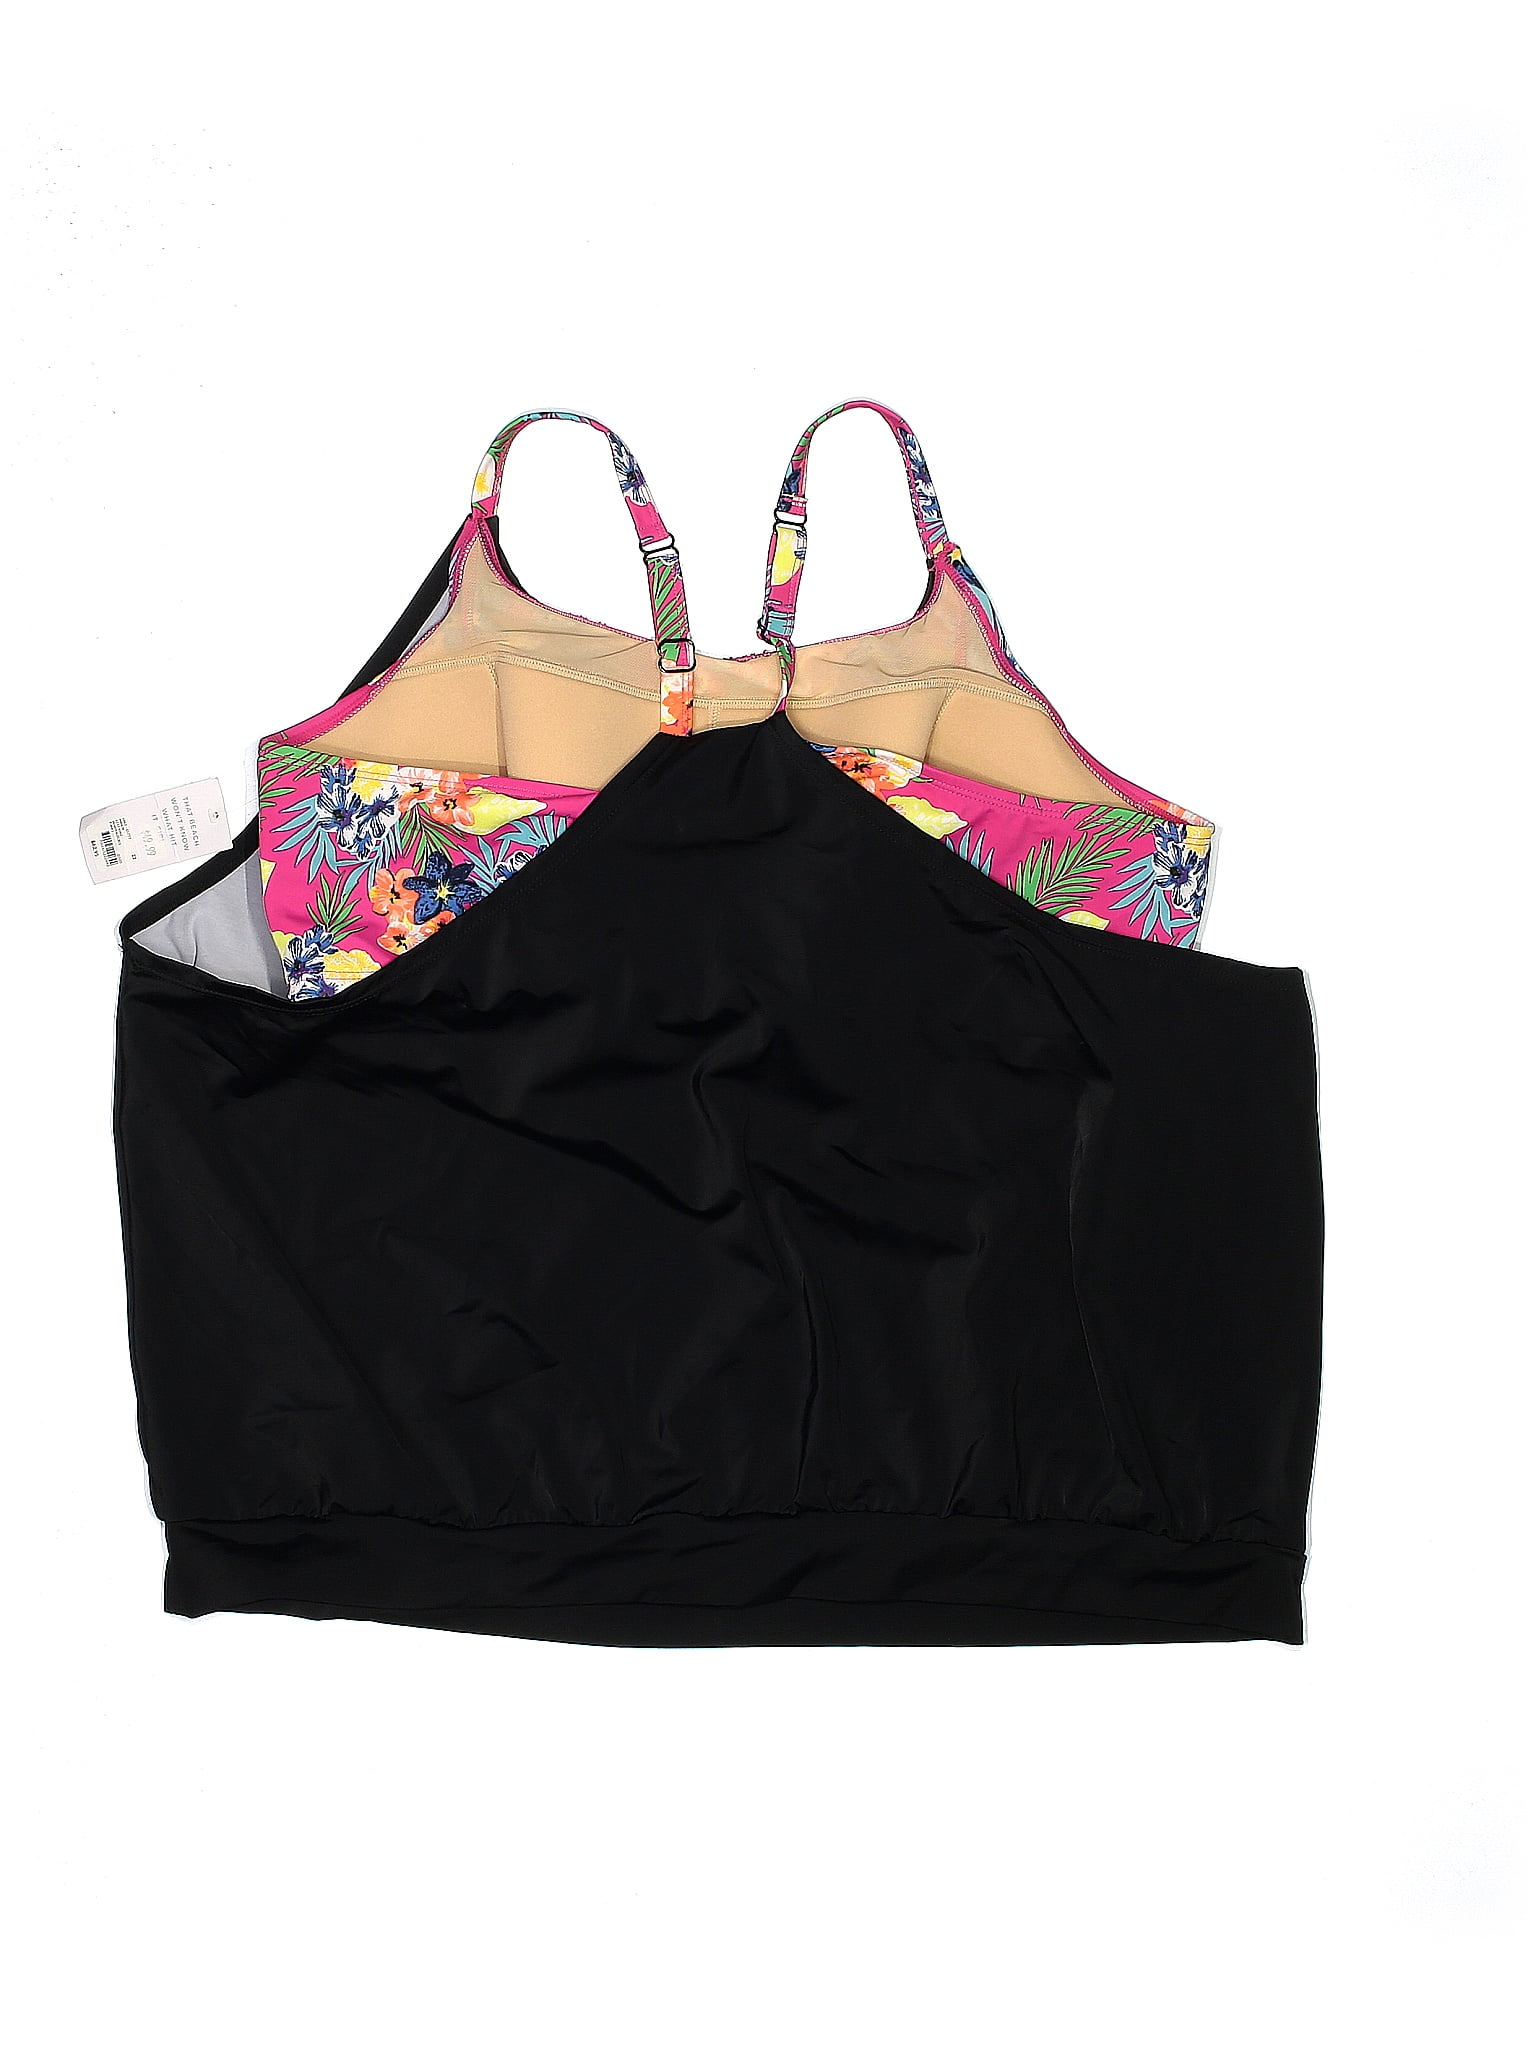 Swim by Cacique Solid Black Swimsuit Top Size XL (40D) - 52% off